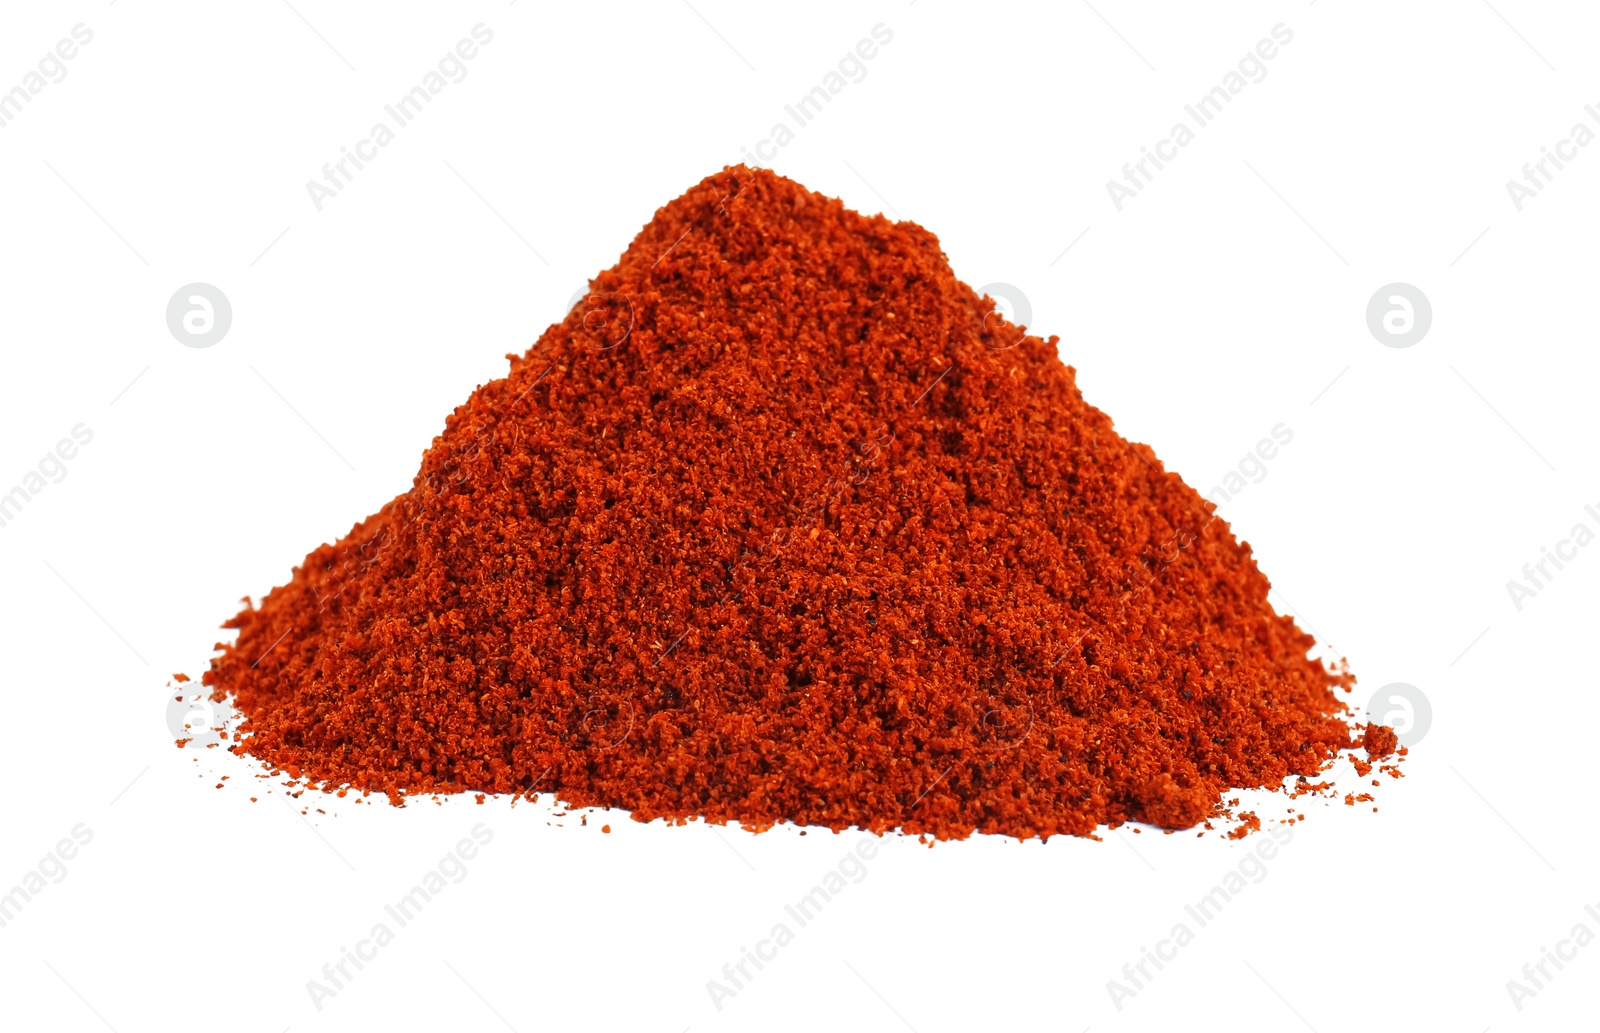 Photo of Heap of aromatic paprika powder isolated on white